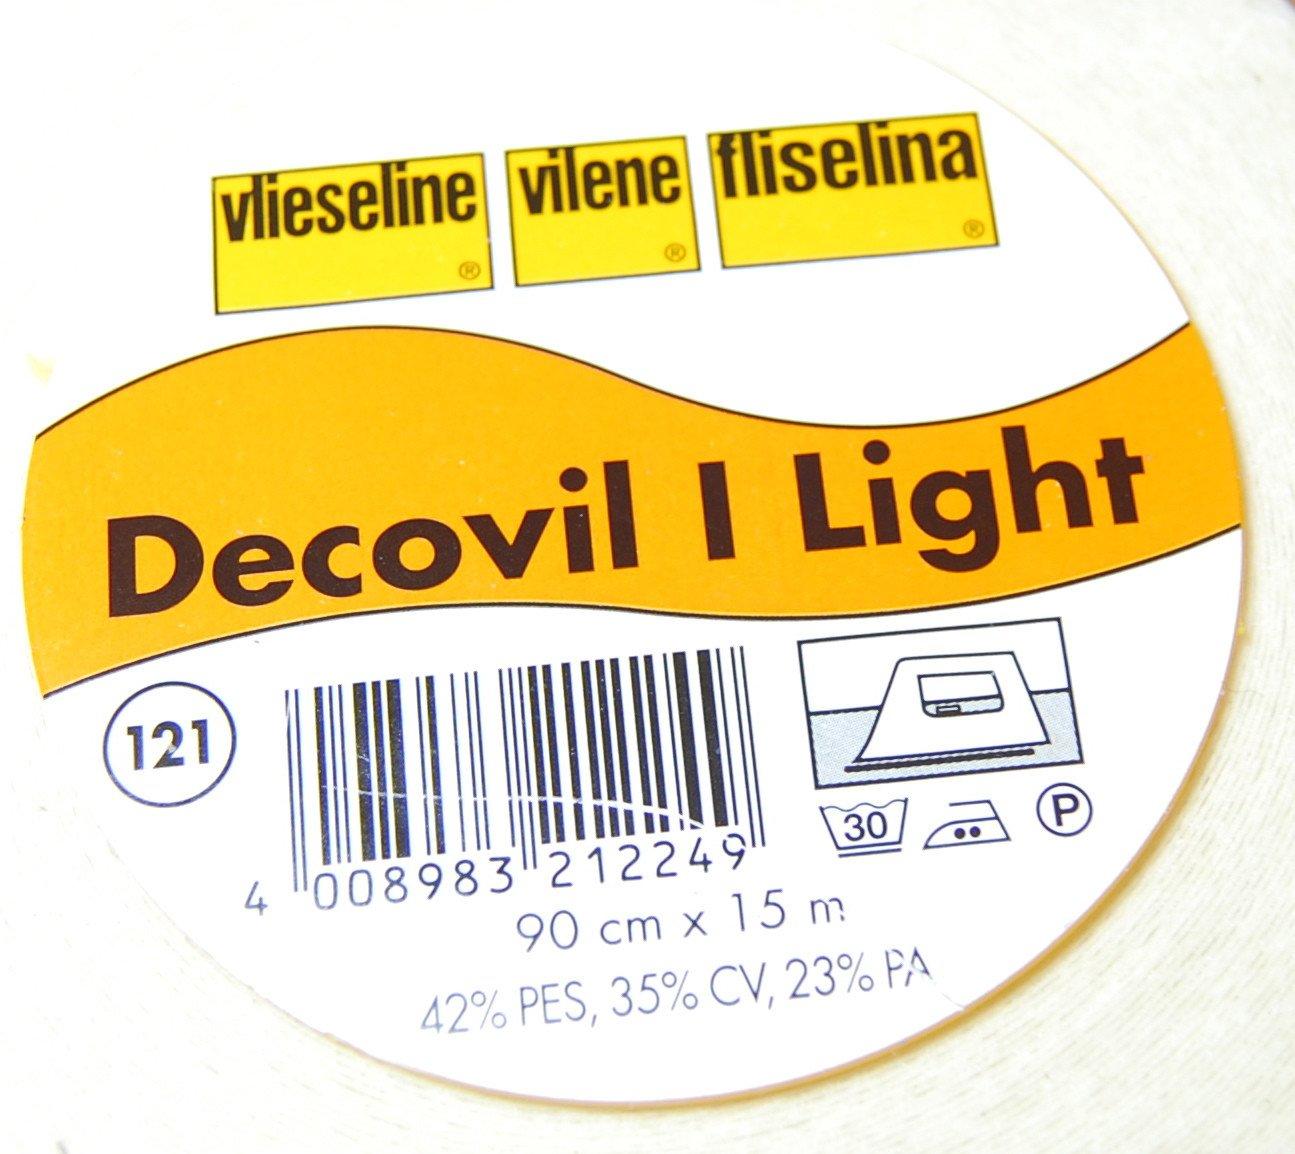 Vlieseline Decovil Light Fusible Interfacing for bag making is 90cm wide